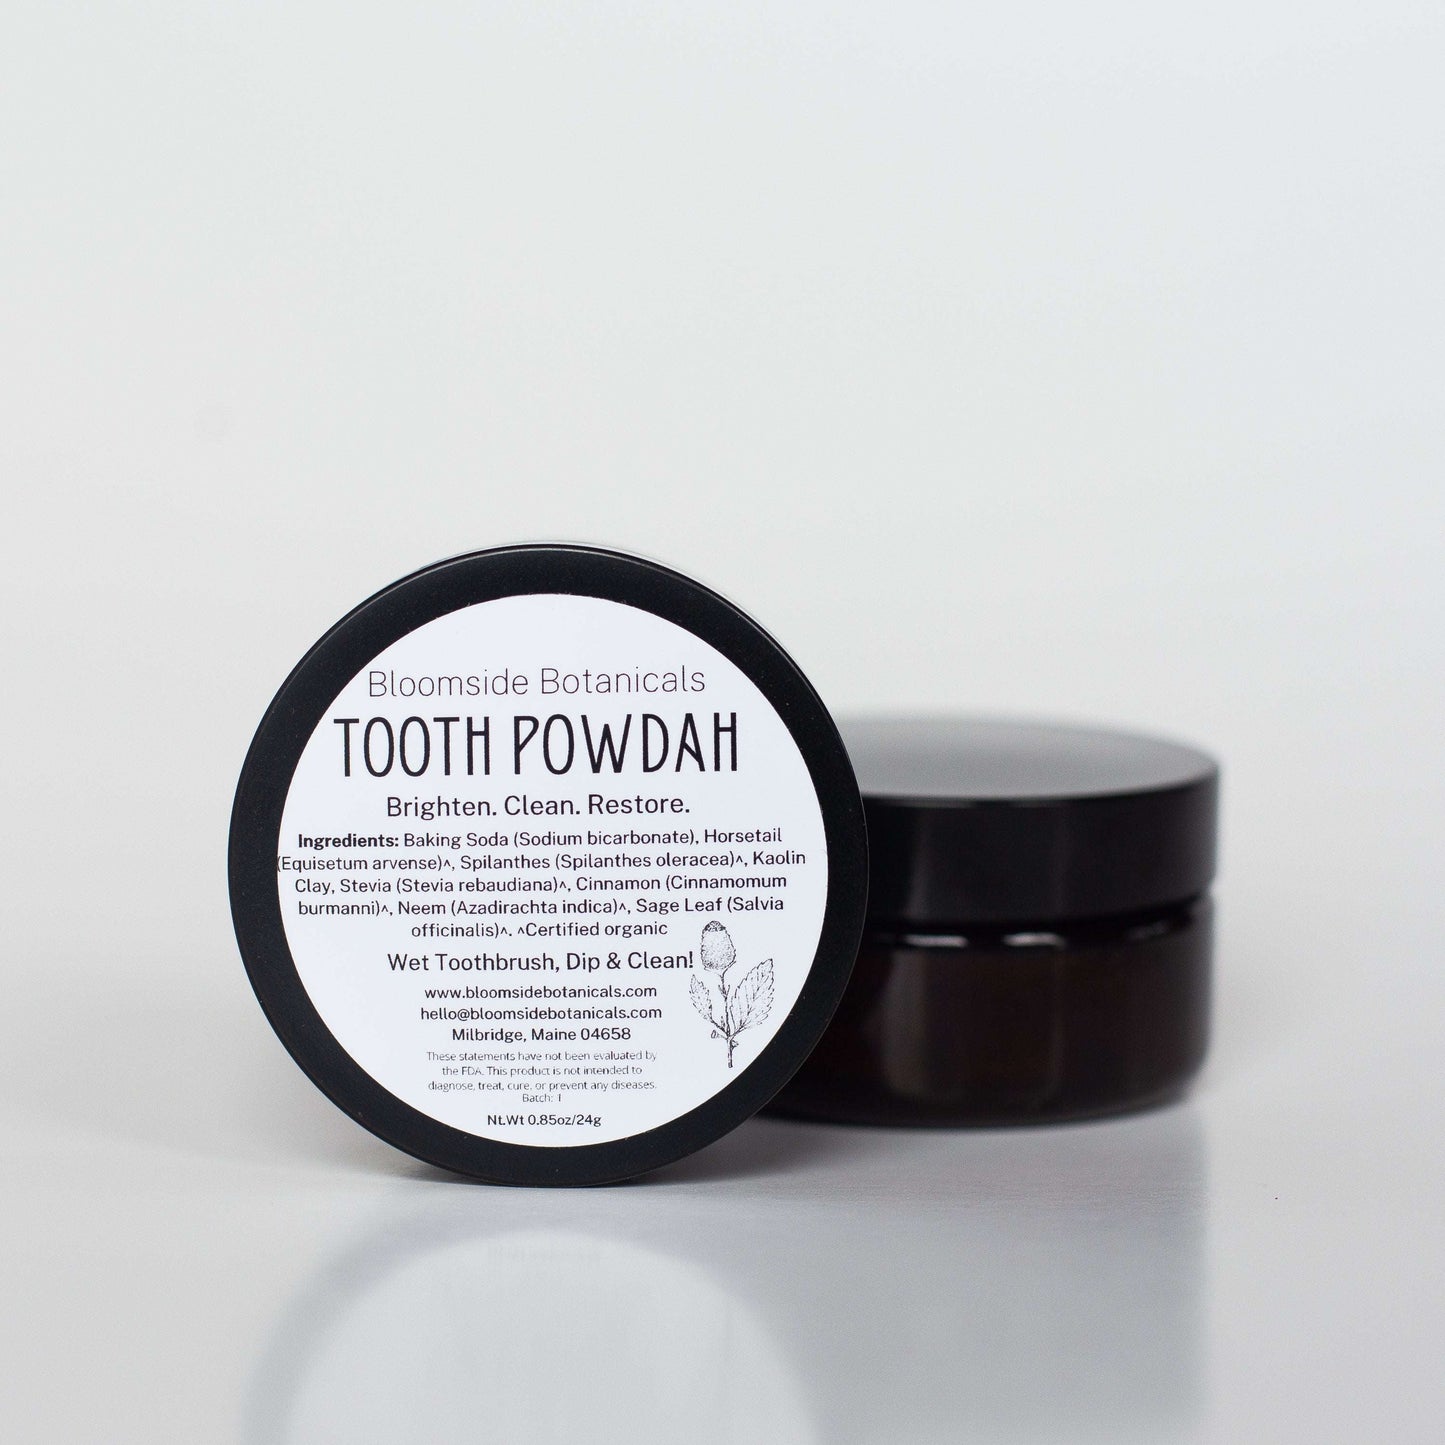 Tooth Powdah - Tooth Powder - Toothpowder - Natural tooth care Bloomside Botanicals